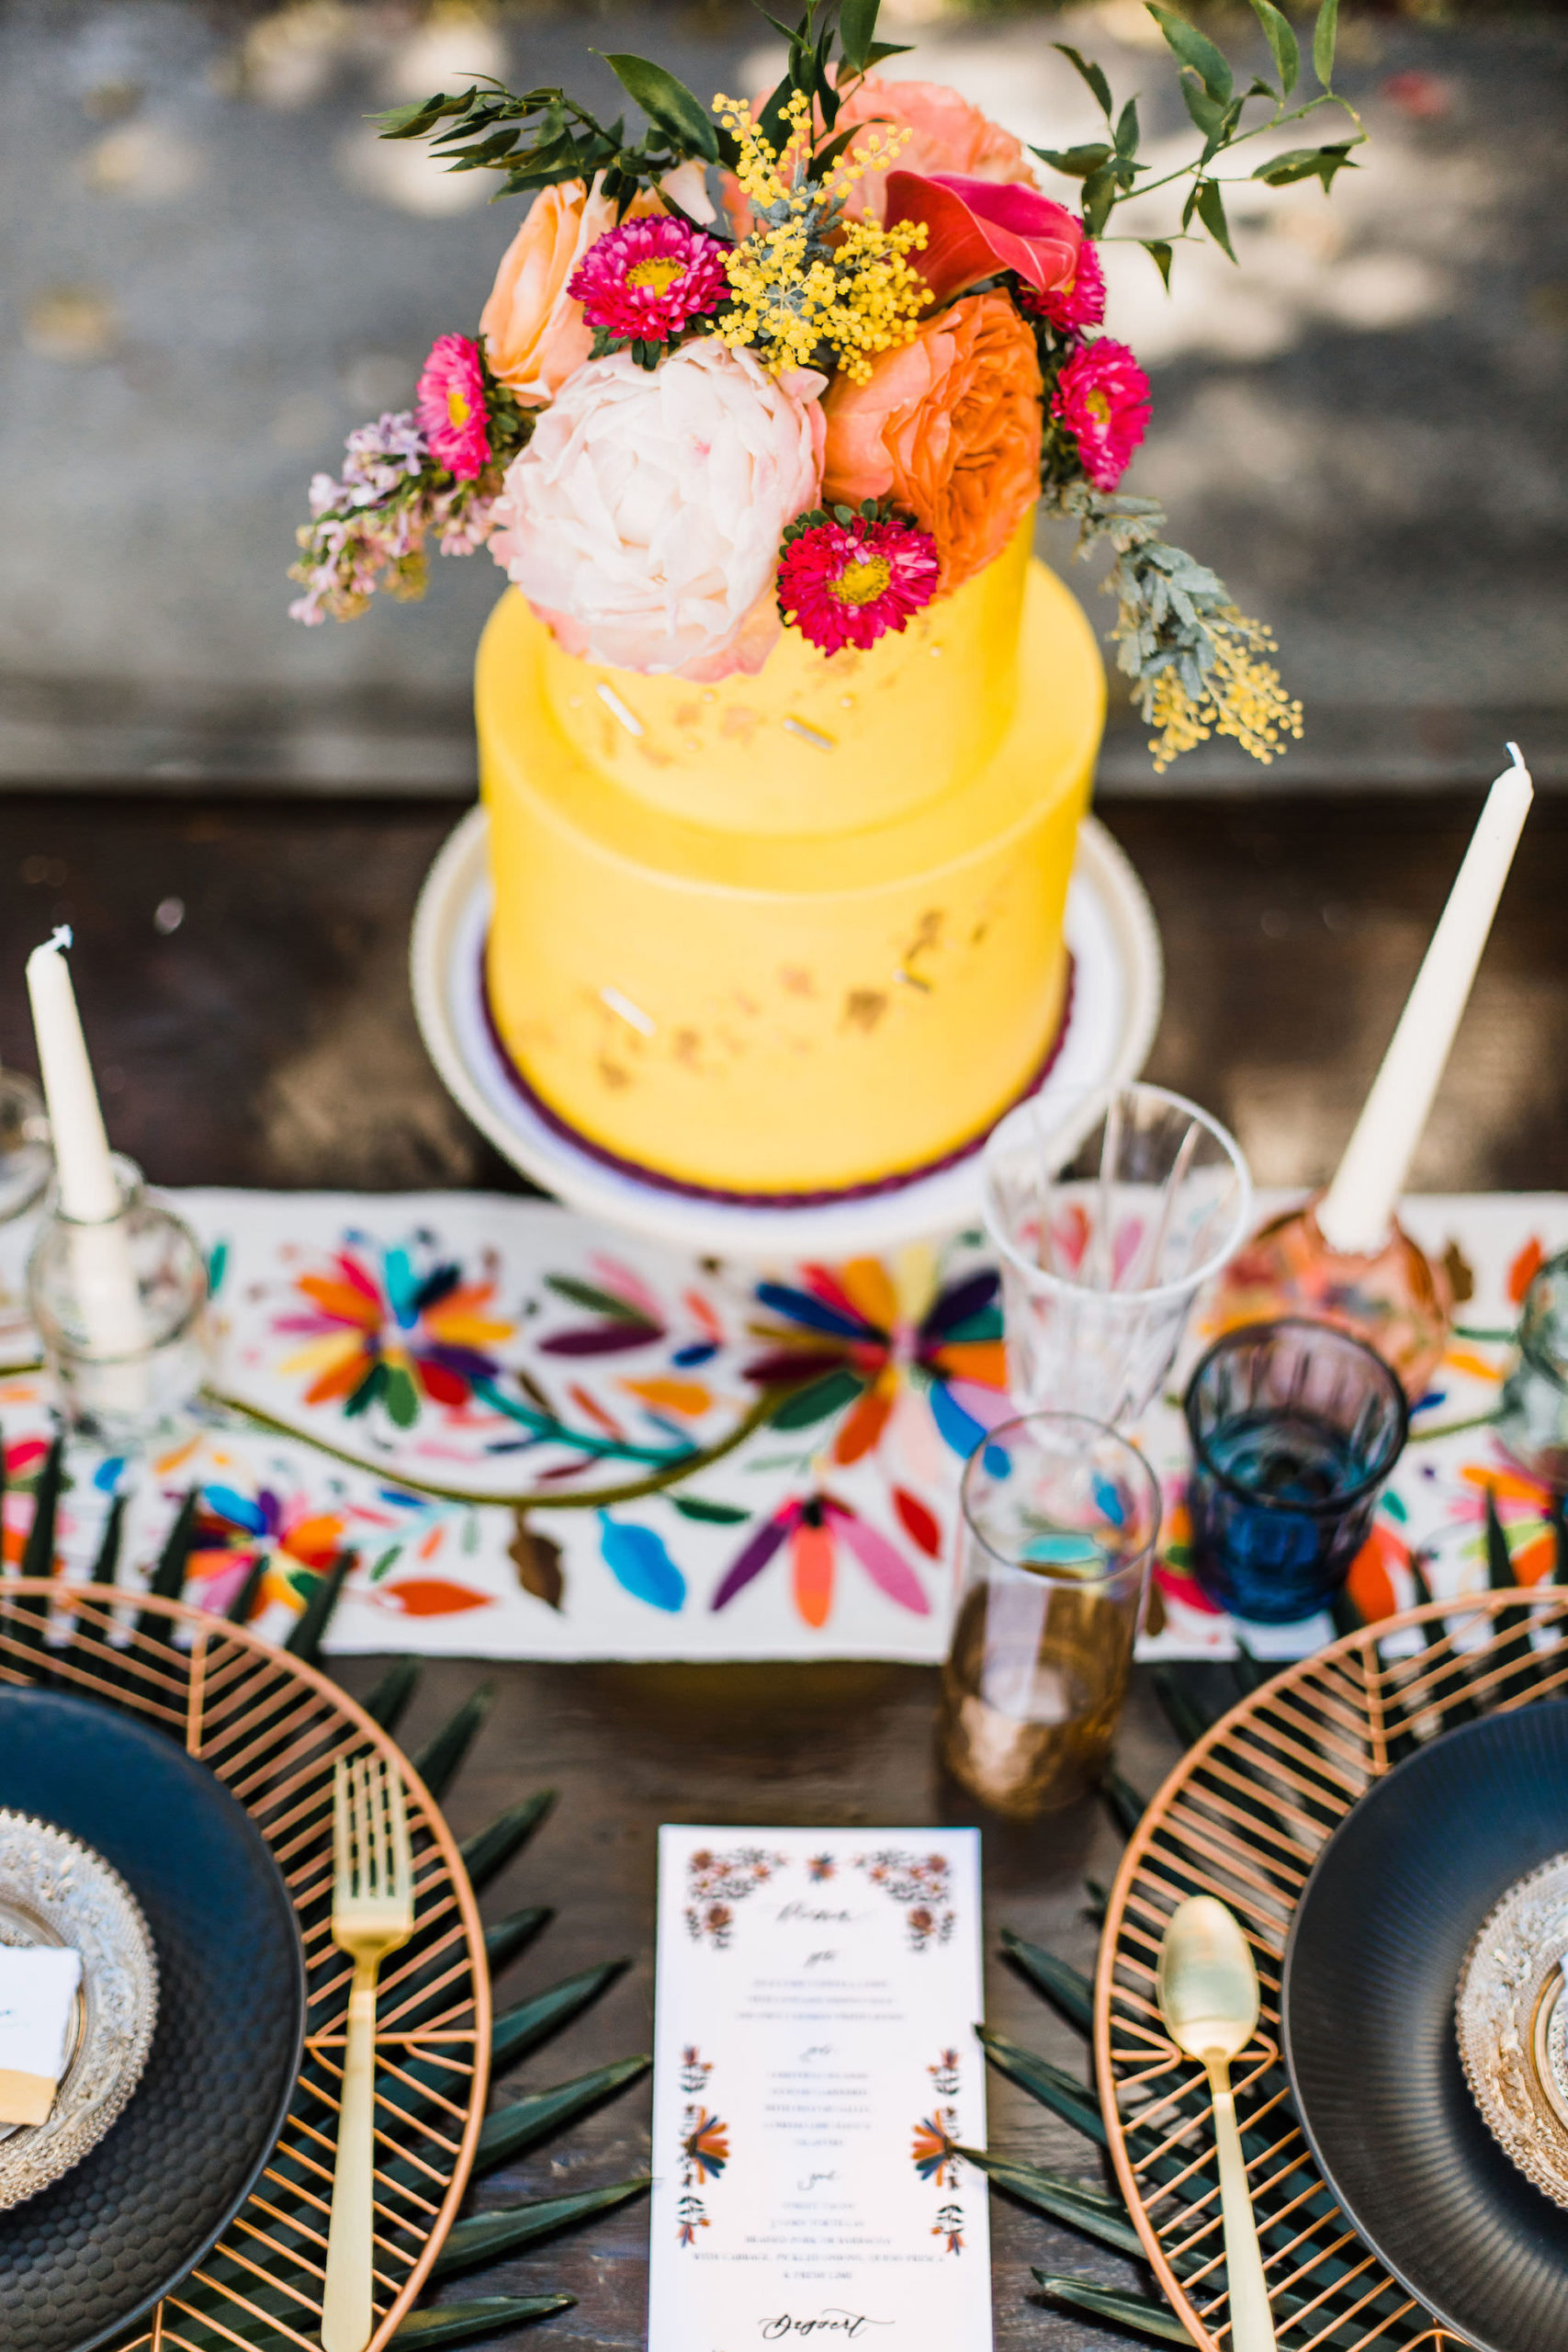 Mexican Inspired Wedding Reception Decor with Modern Geometric Plate Charger with Whimsical Accent Decor and Yellow Two Tiered Cake with Tropical Flowers and Greenery